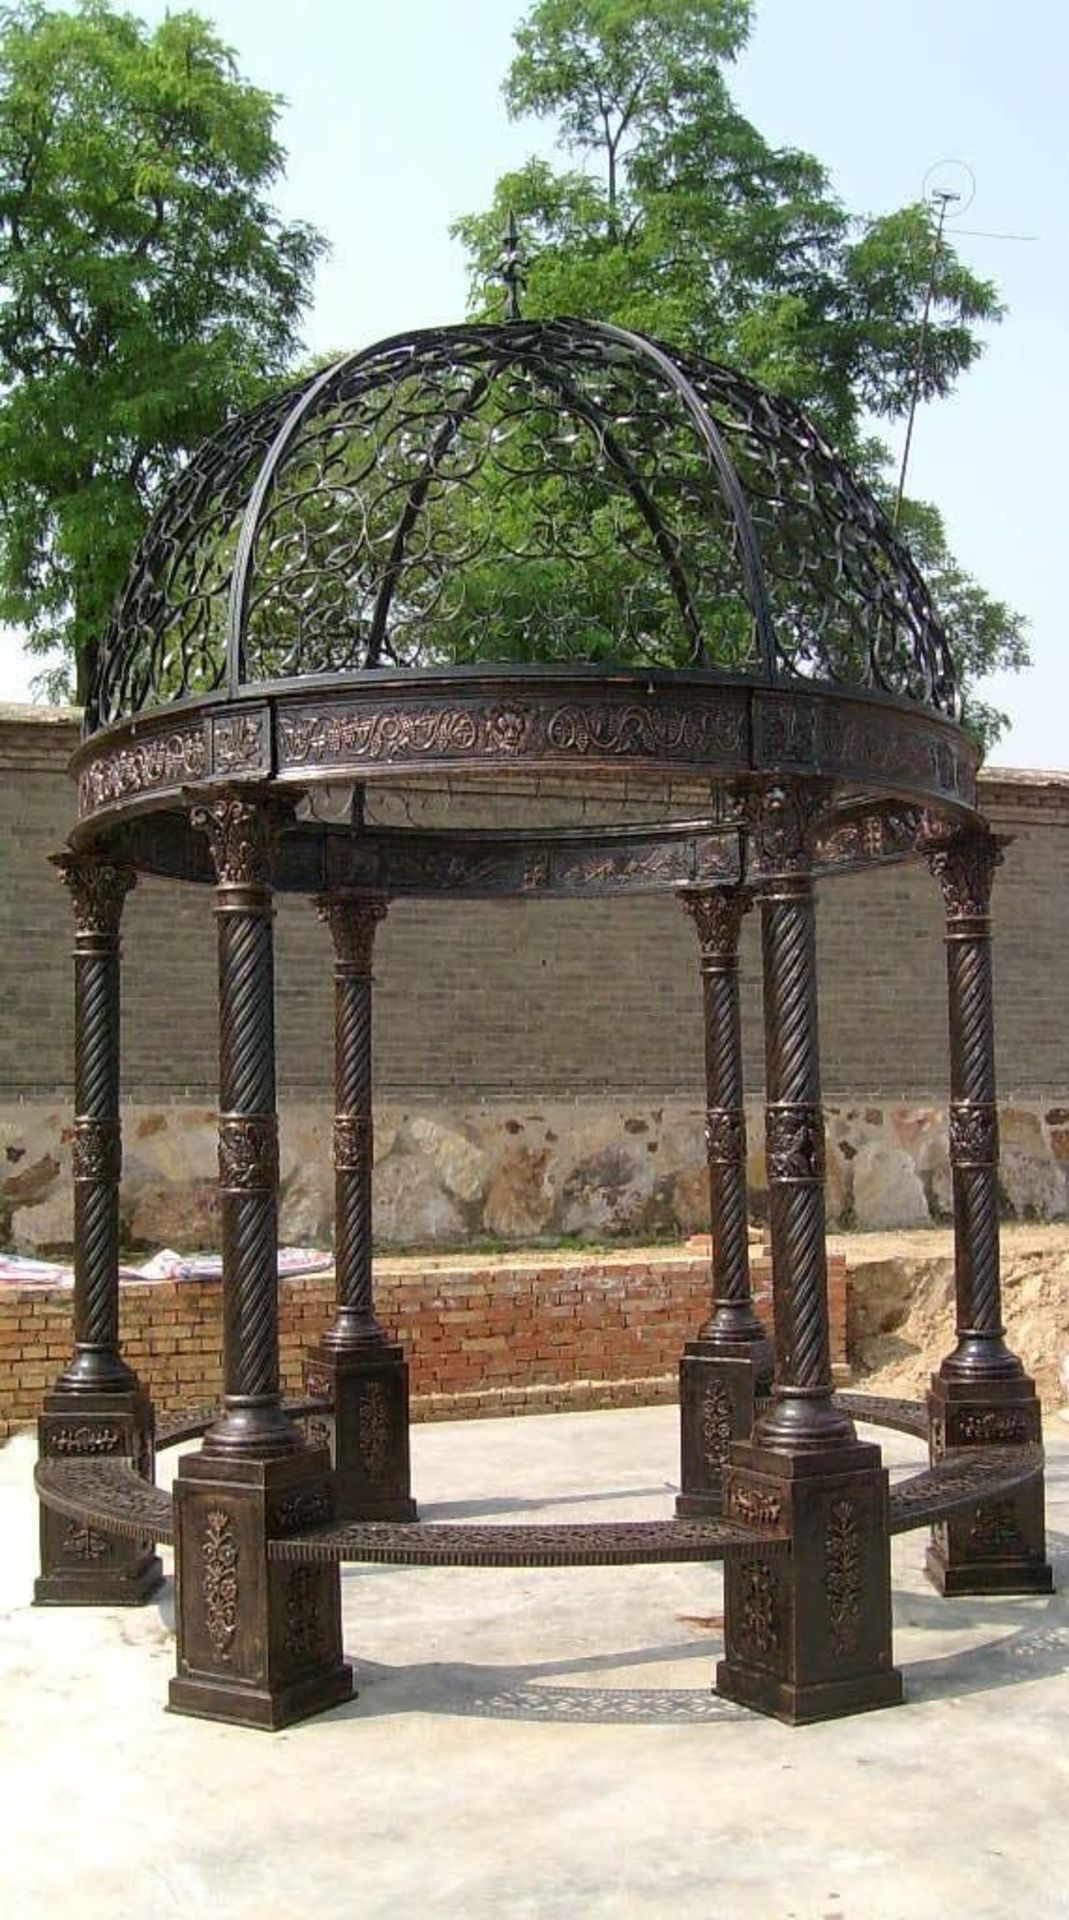 CAST IRON ORNATE GAZEBO WITH CORINTHIUM COLUMNS AND ORNATE WROUGHT IRON ROOF - UNUSED - CRATED – NEW